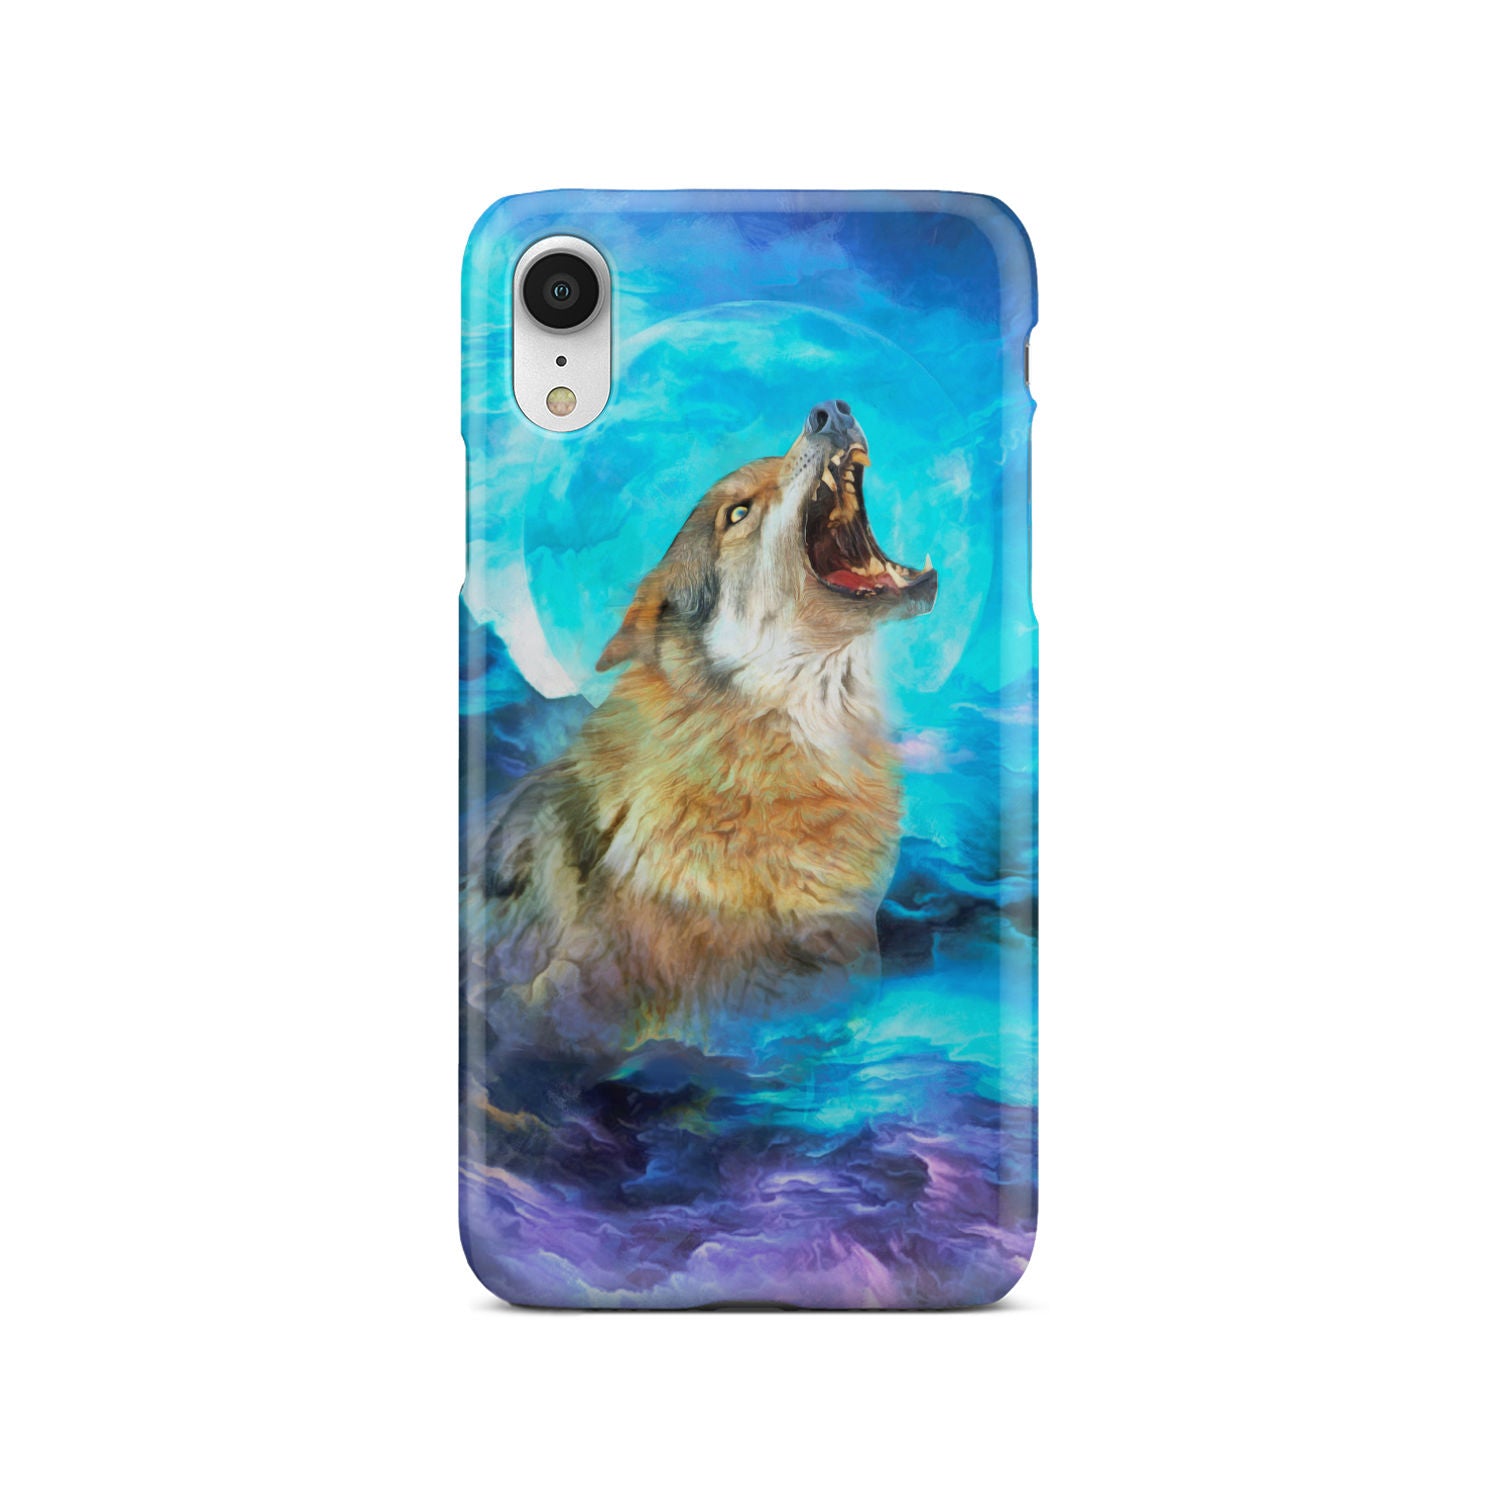 Powwow Store gb nat00422 howling wolf blue moon native phone case